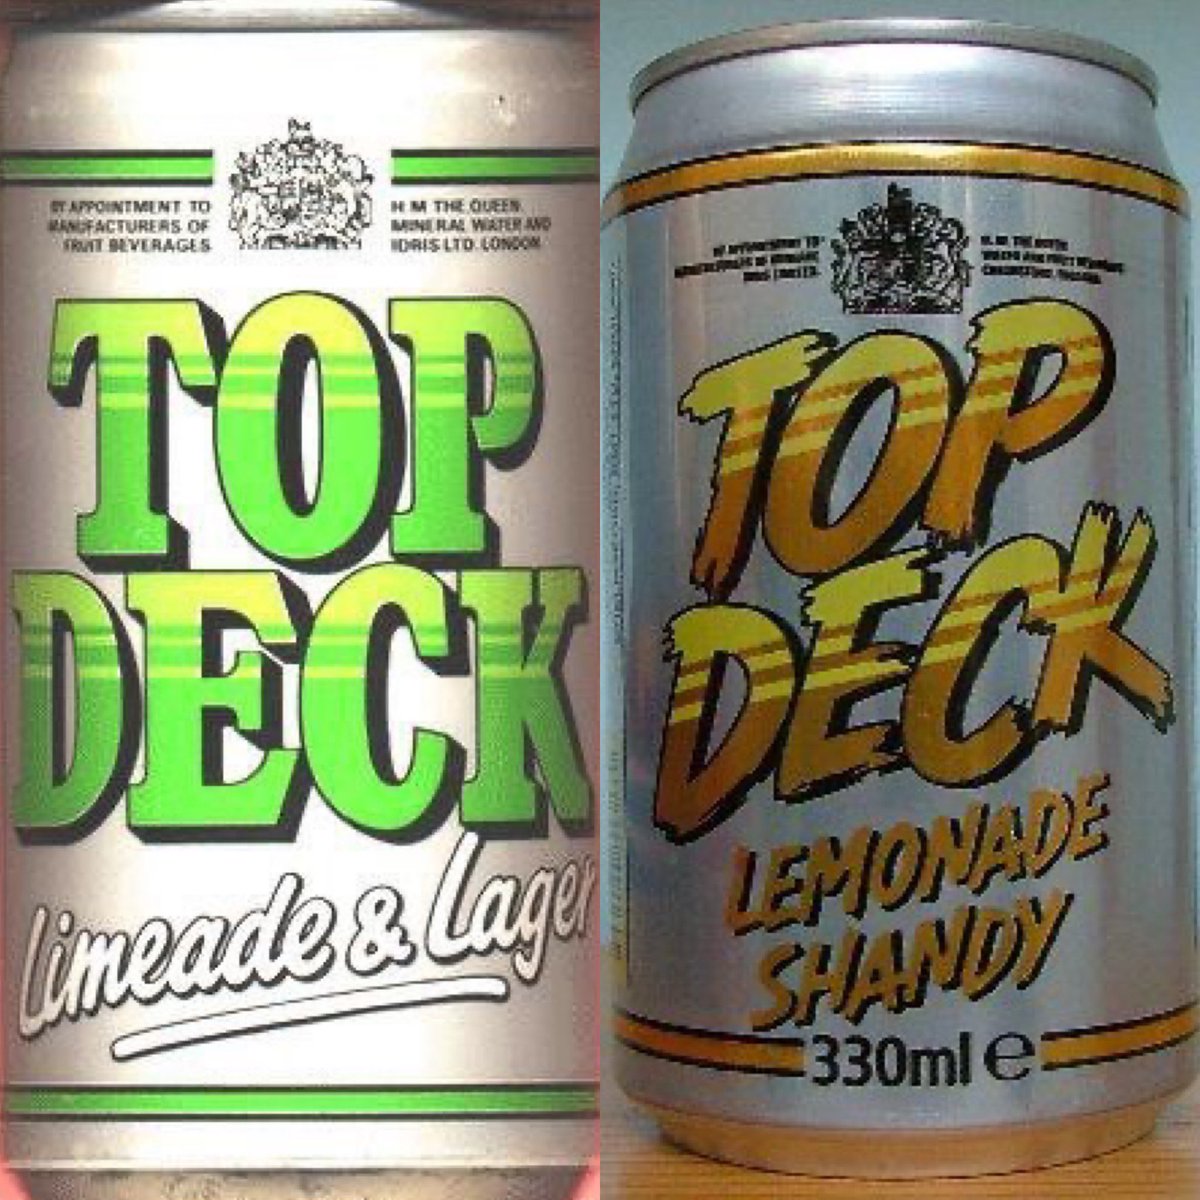 Ade Belcher on Twitter: it was as hot as it is today in 1970s these were essential Who could drink an ice cold right ☀️ 🧊 # topdeck #shandy #